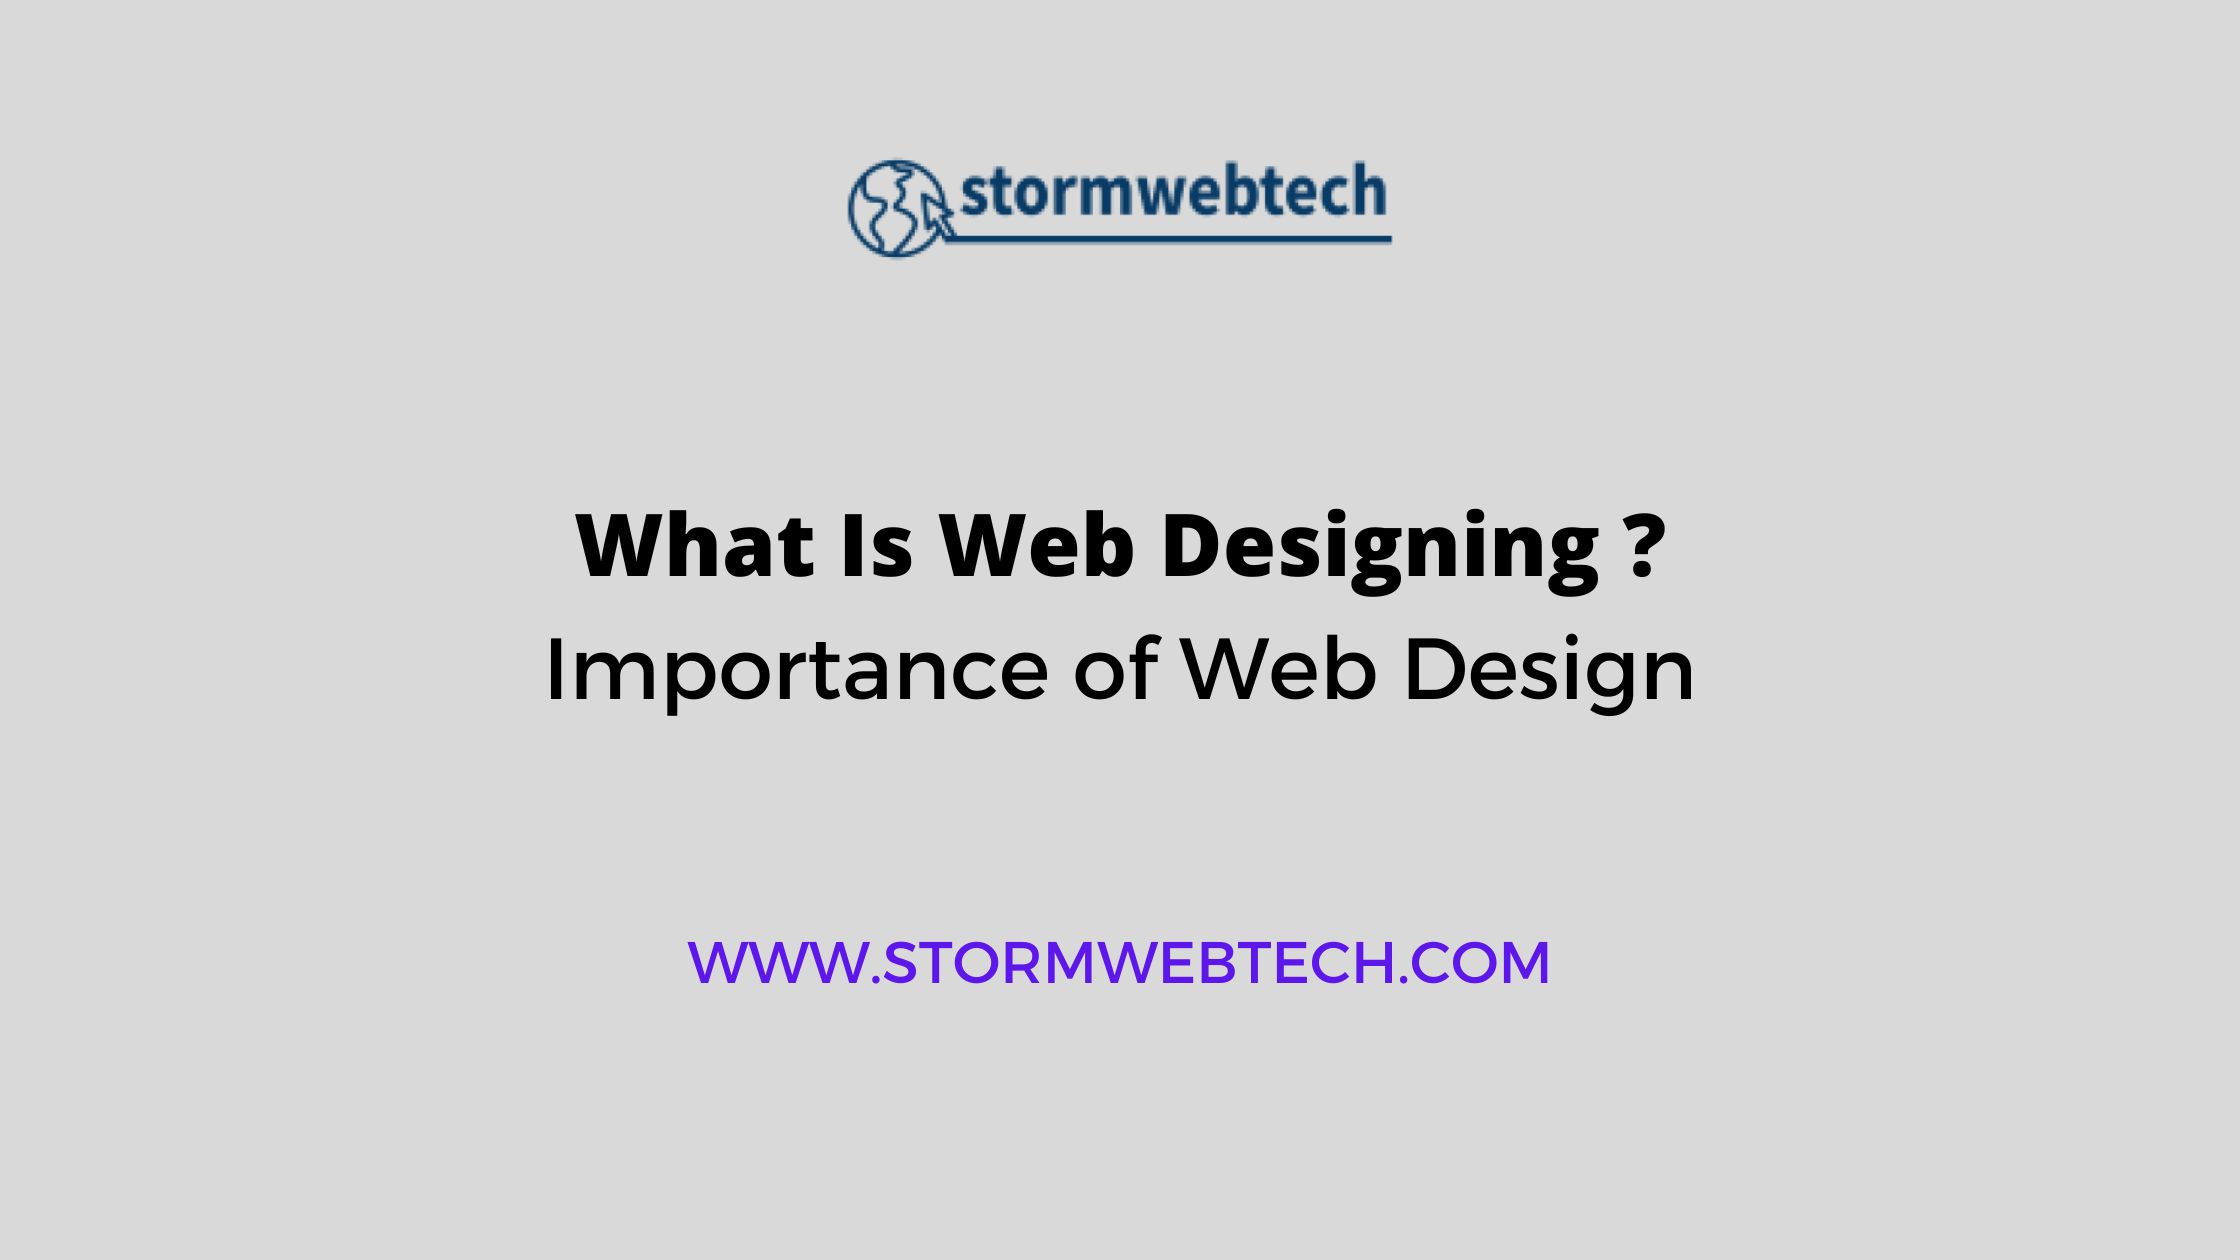 What Is Web Designing ? Importance of Web Designing, Types Of Web Design, Key Principles of Web Design, Web Design Tools and Resources